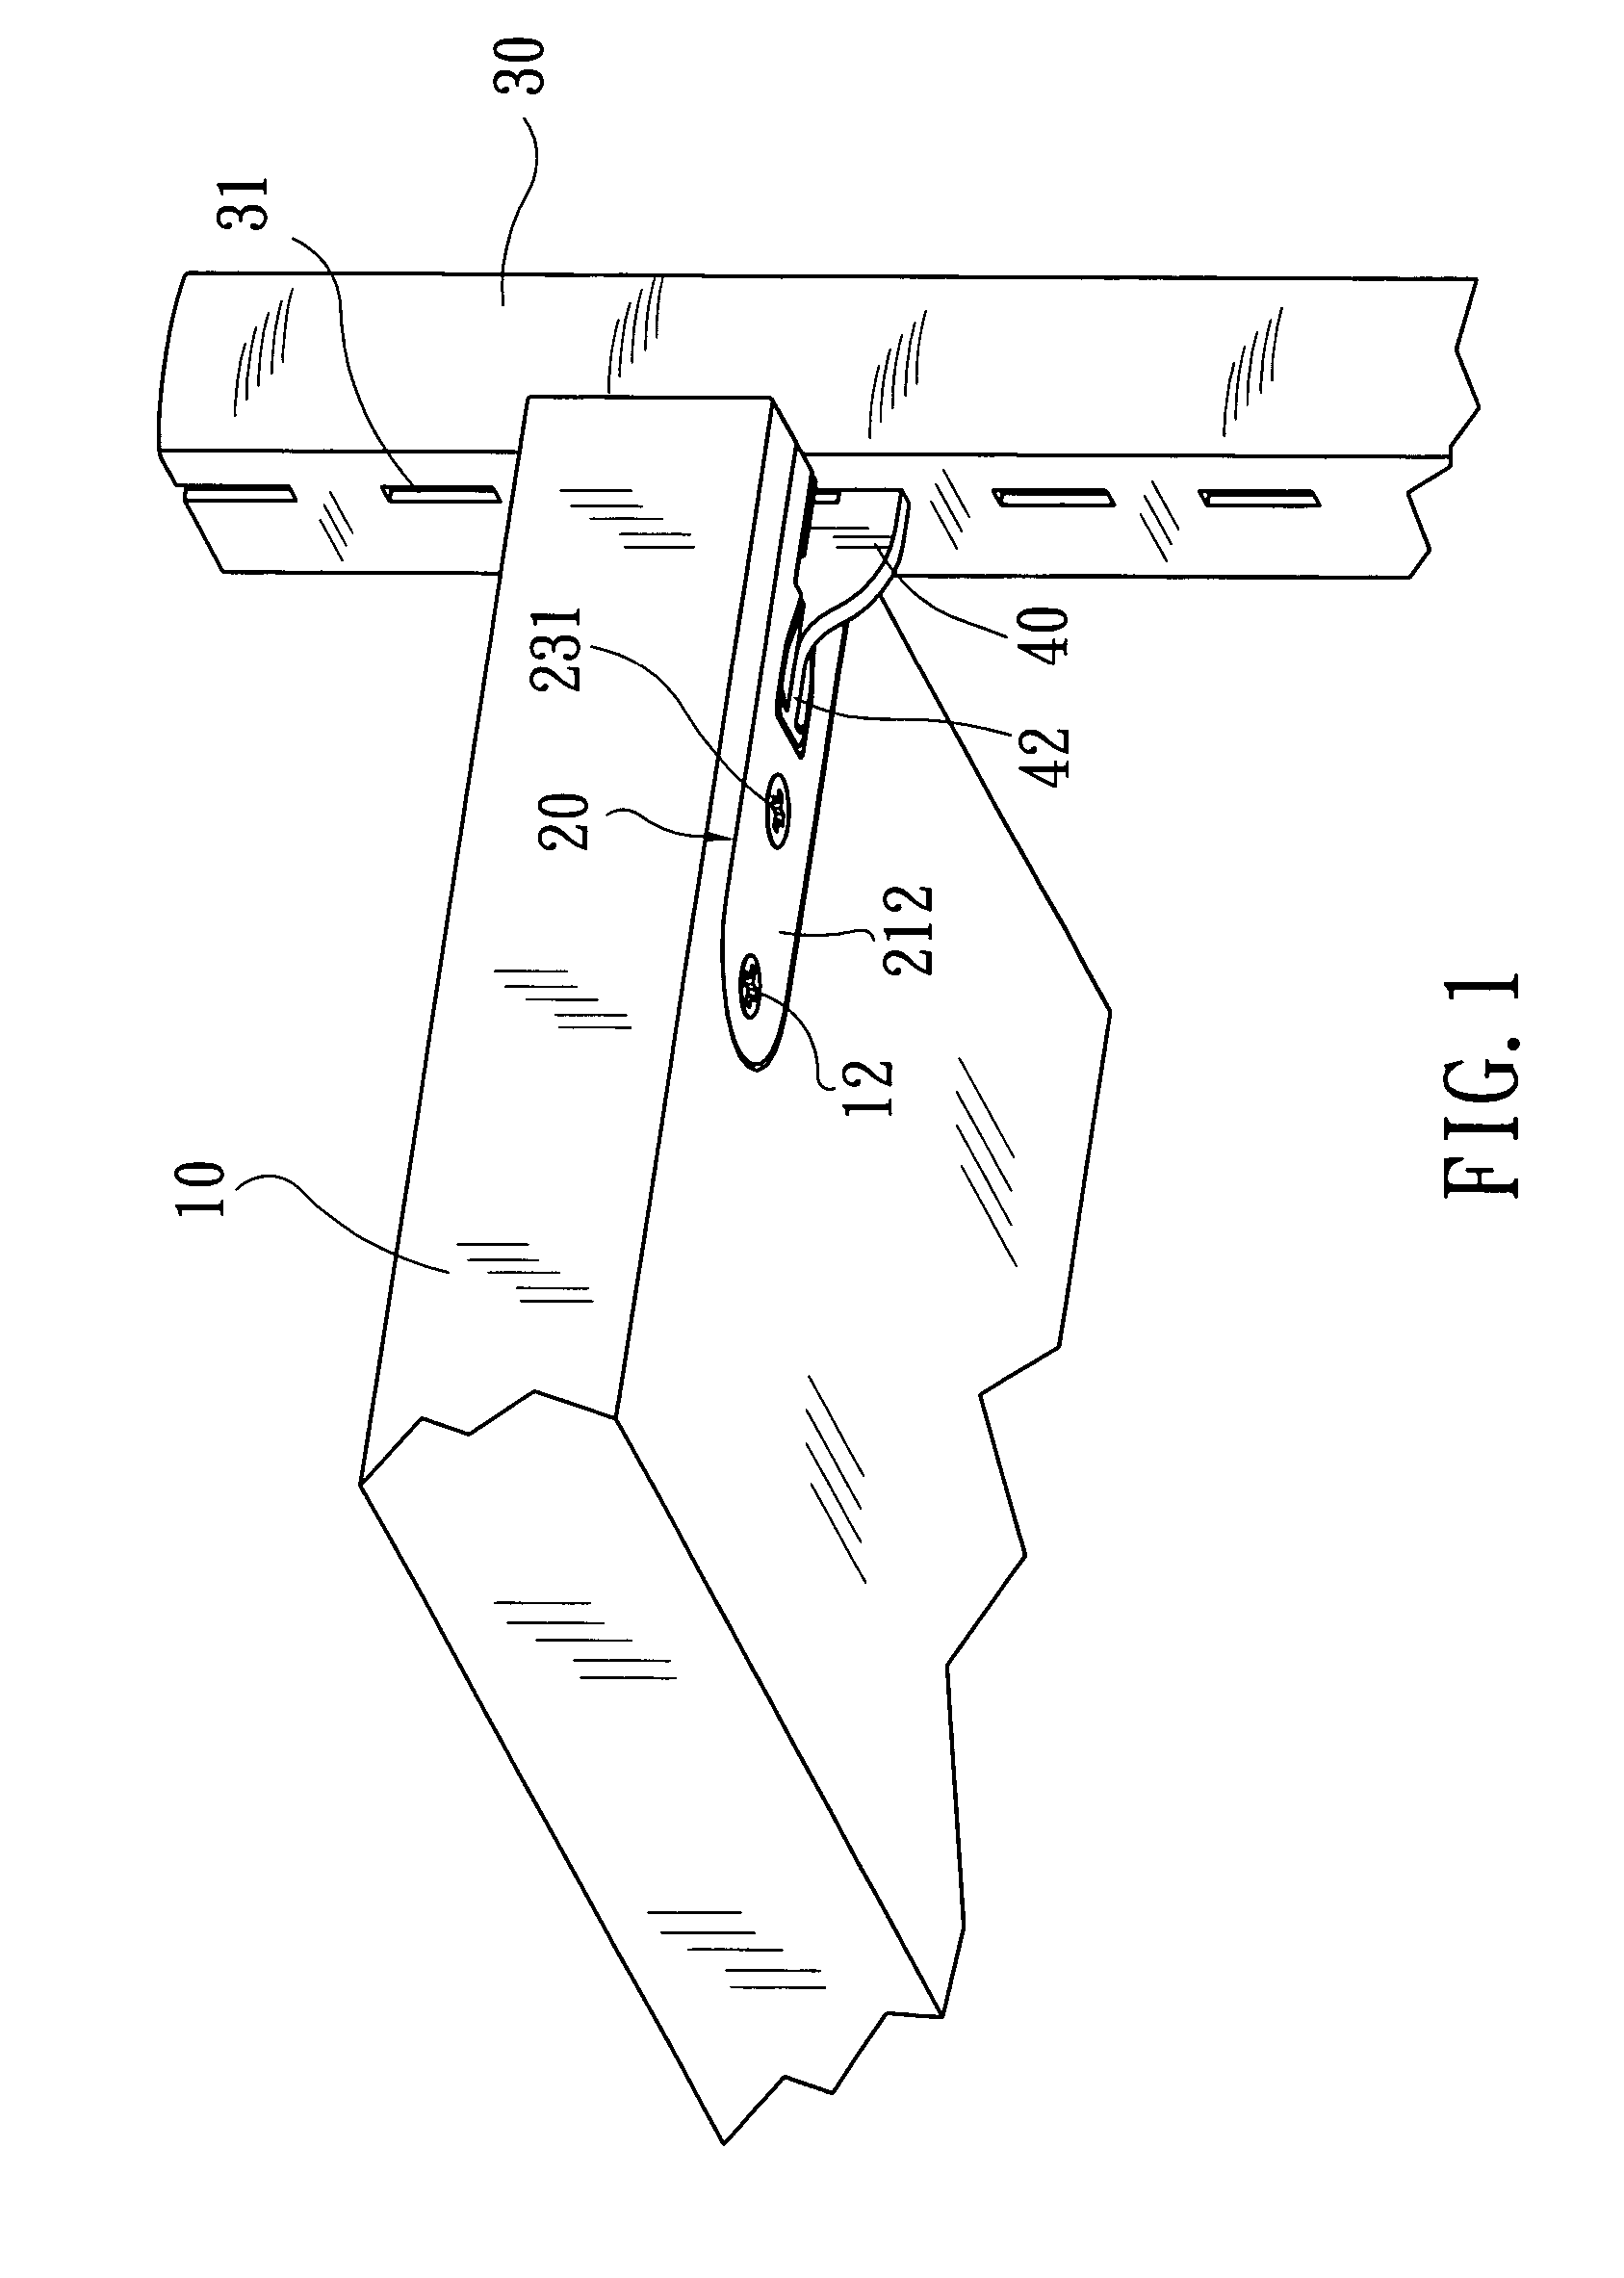 Coupling mechanism for connecting board-type shelf to vertical post of a sectional rack